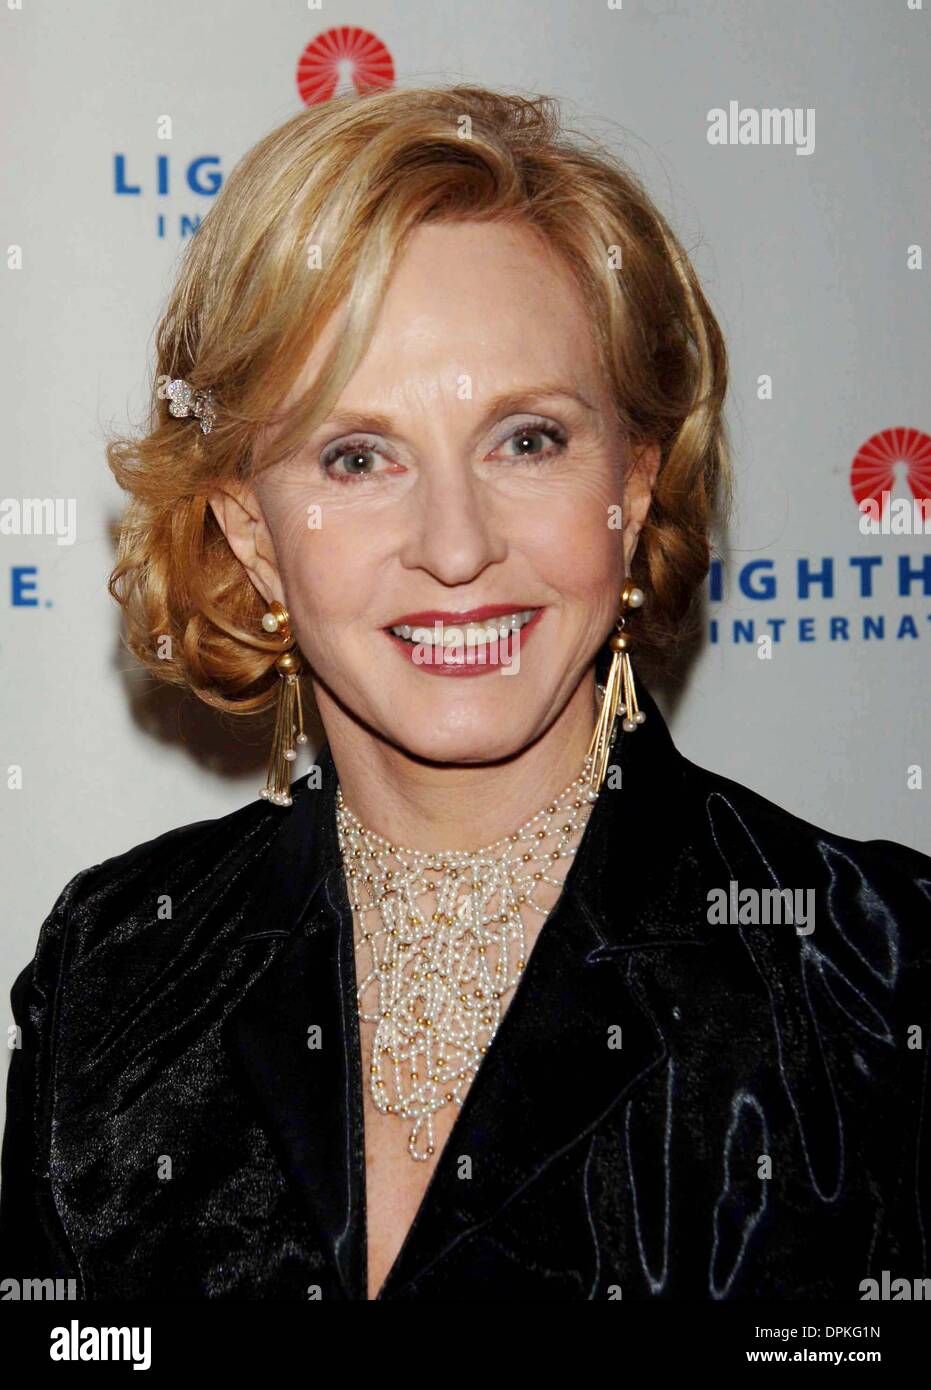 Feb. 16, 2006 - New York, NEW YORK - MIKE WALLACE, ARI FLEISCHER, MARIO BUATTA CELEBRATE 100 YEARS FOR LIGHTHOUSE INTERNATIONAL AT THE 2006 WINTERNIGHT GALA AT THE MARRIOTT MARQUIS IN NYC ON FEBRUARY 15, 2006.. ANDREA RENAULT     K46833AR.PIA LINDSTROM(Credit Image: © Globe Photos/ZUMAPRESS.com) Stock Photo